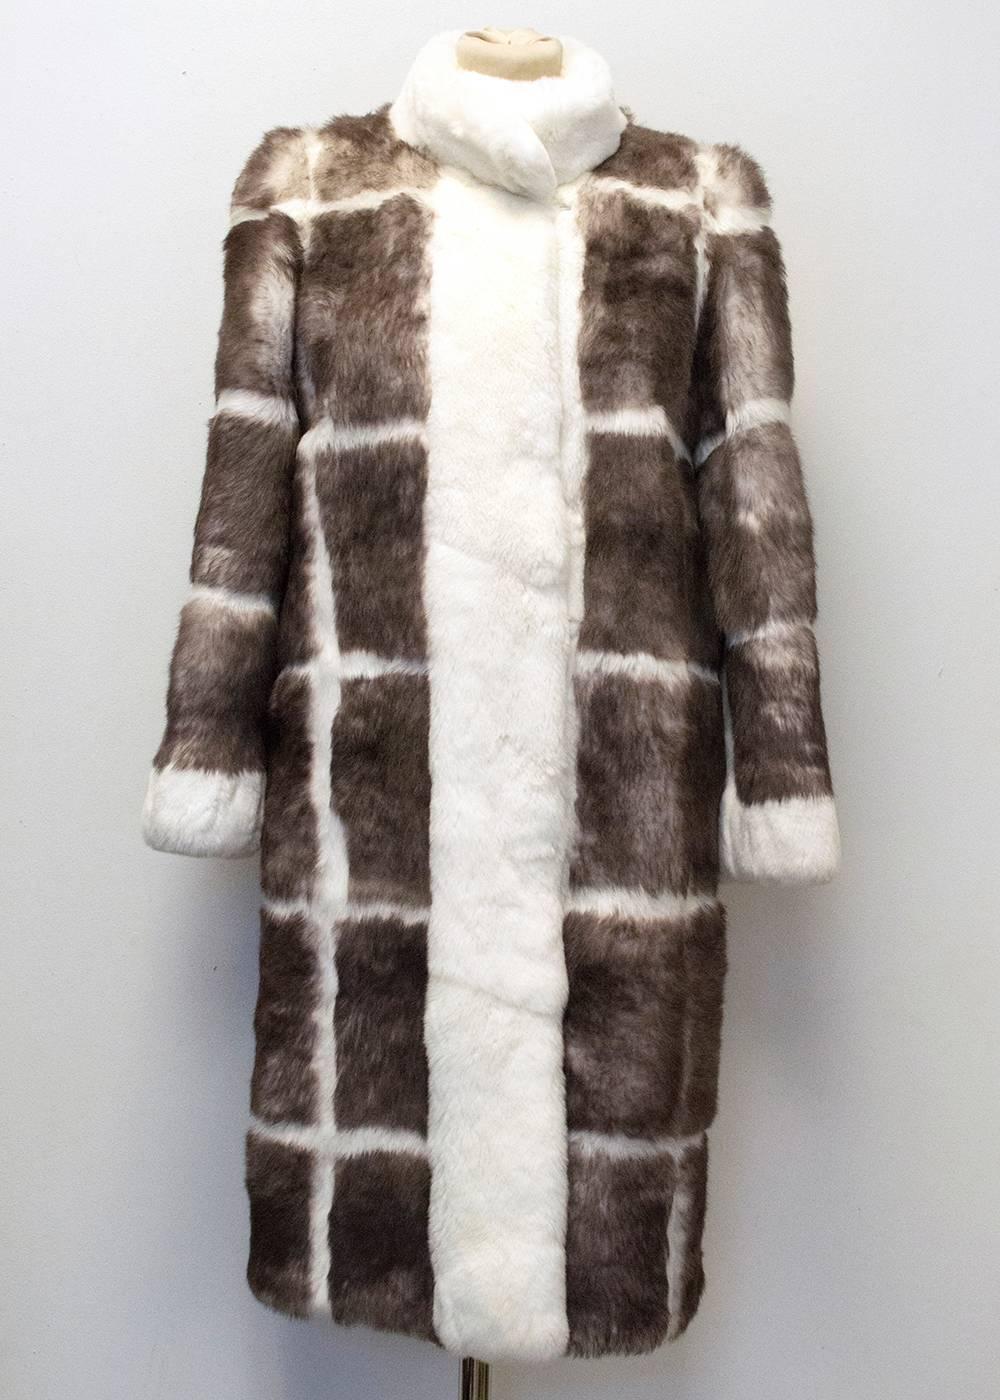 Matthew Williamson checked taupe and cream rabbit fur coat. Long line with a relaxed fit, the coat is medium weight and the sleeves are cropped to the wrist. Soft to the touch with a high neck round collar and two slip pockets at the front. Fully